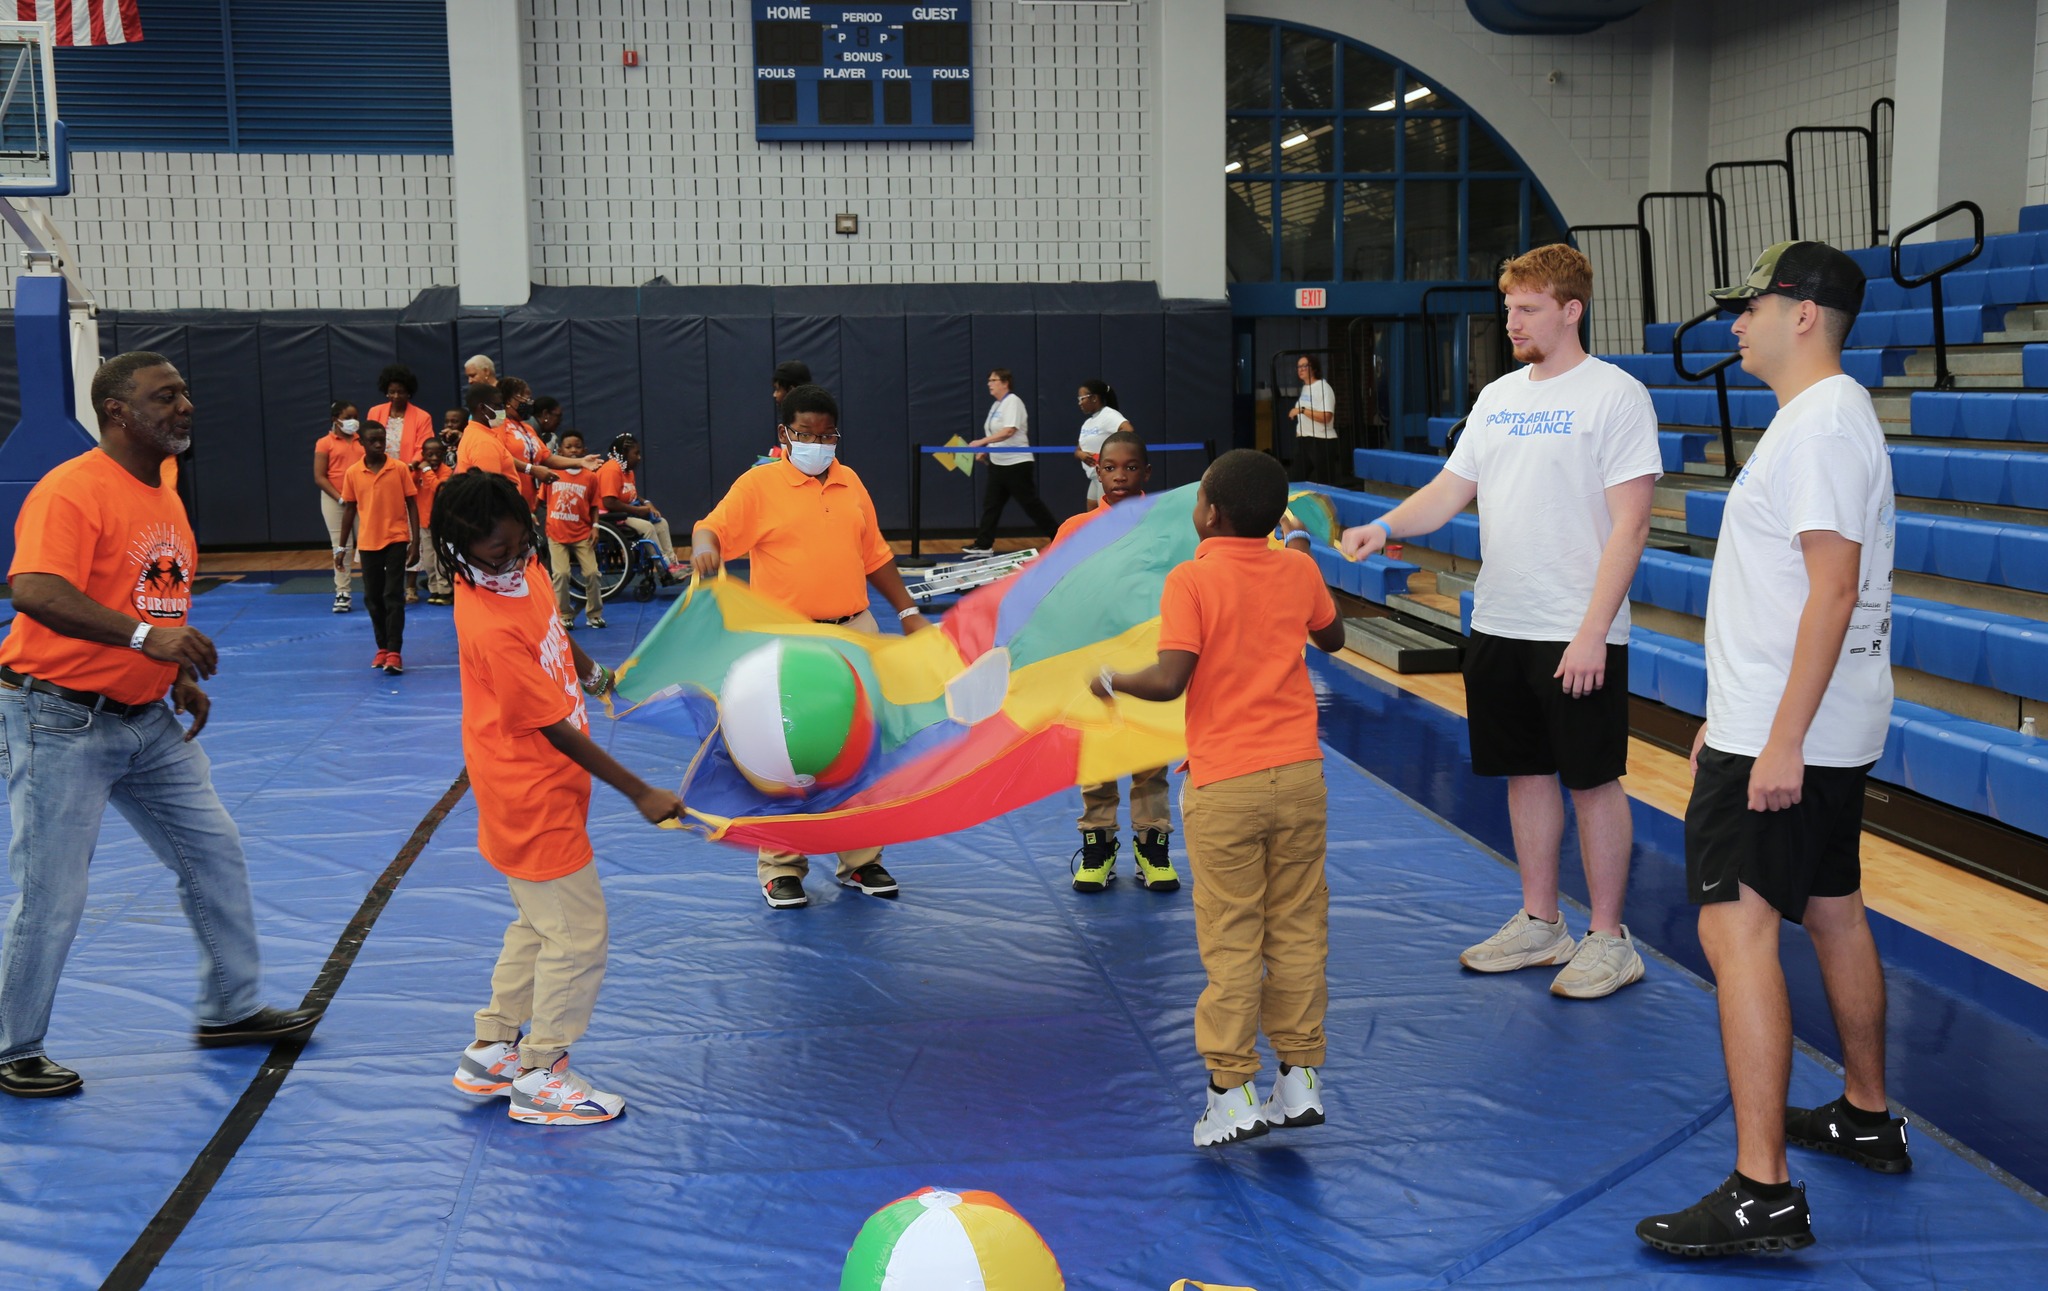 people holding a parachute and playing with a beach ball in a gym